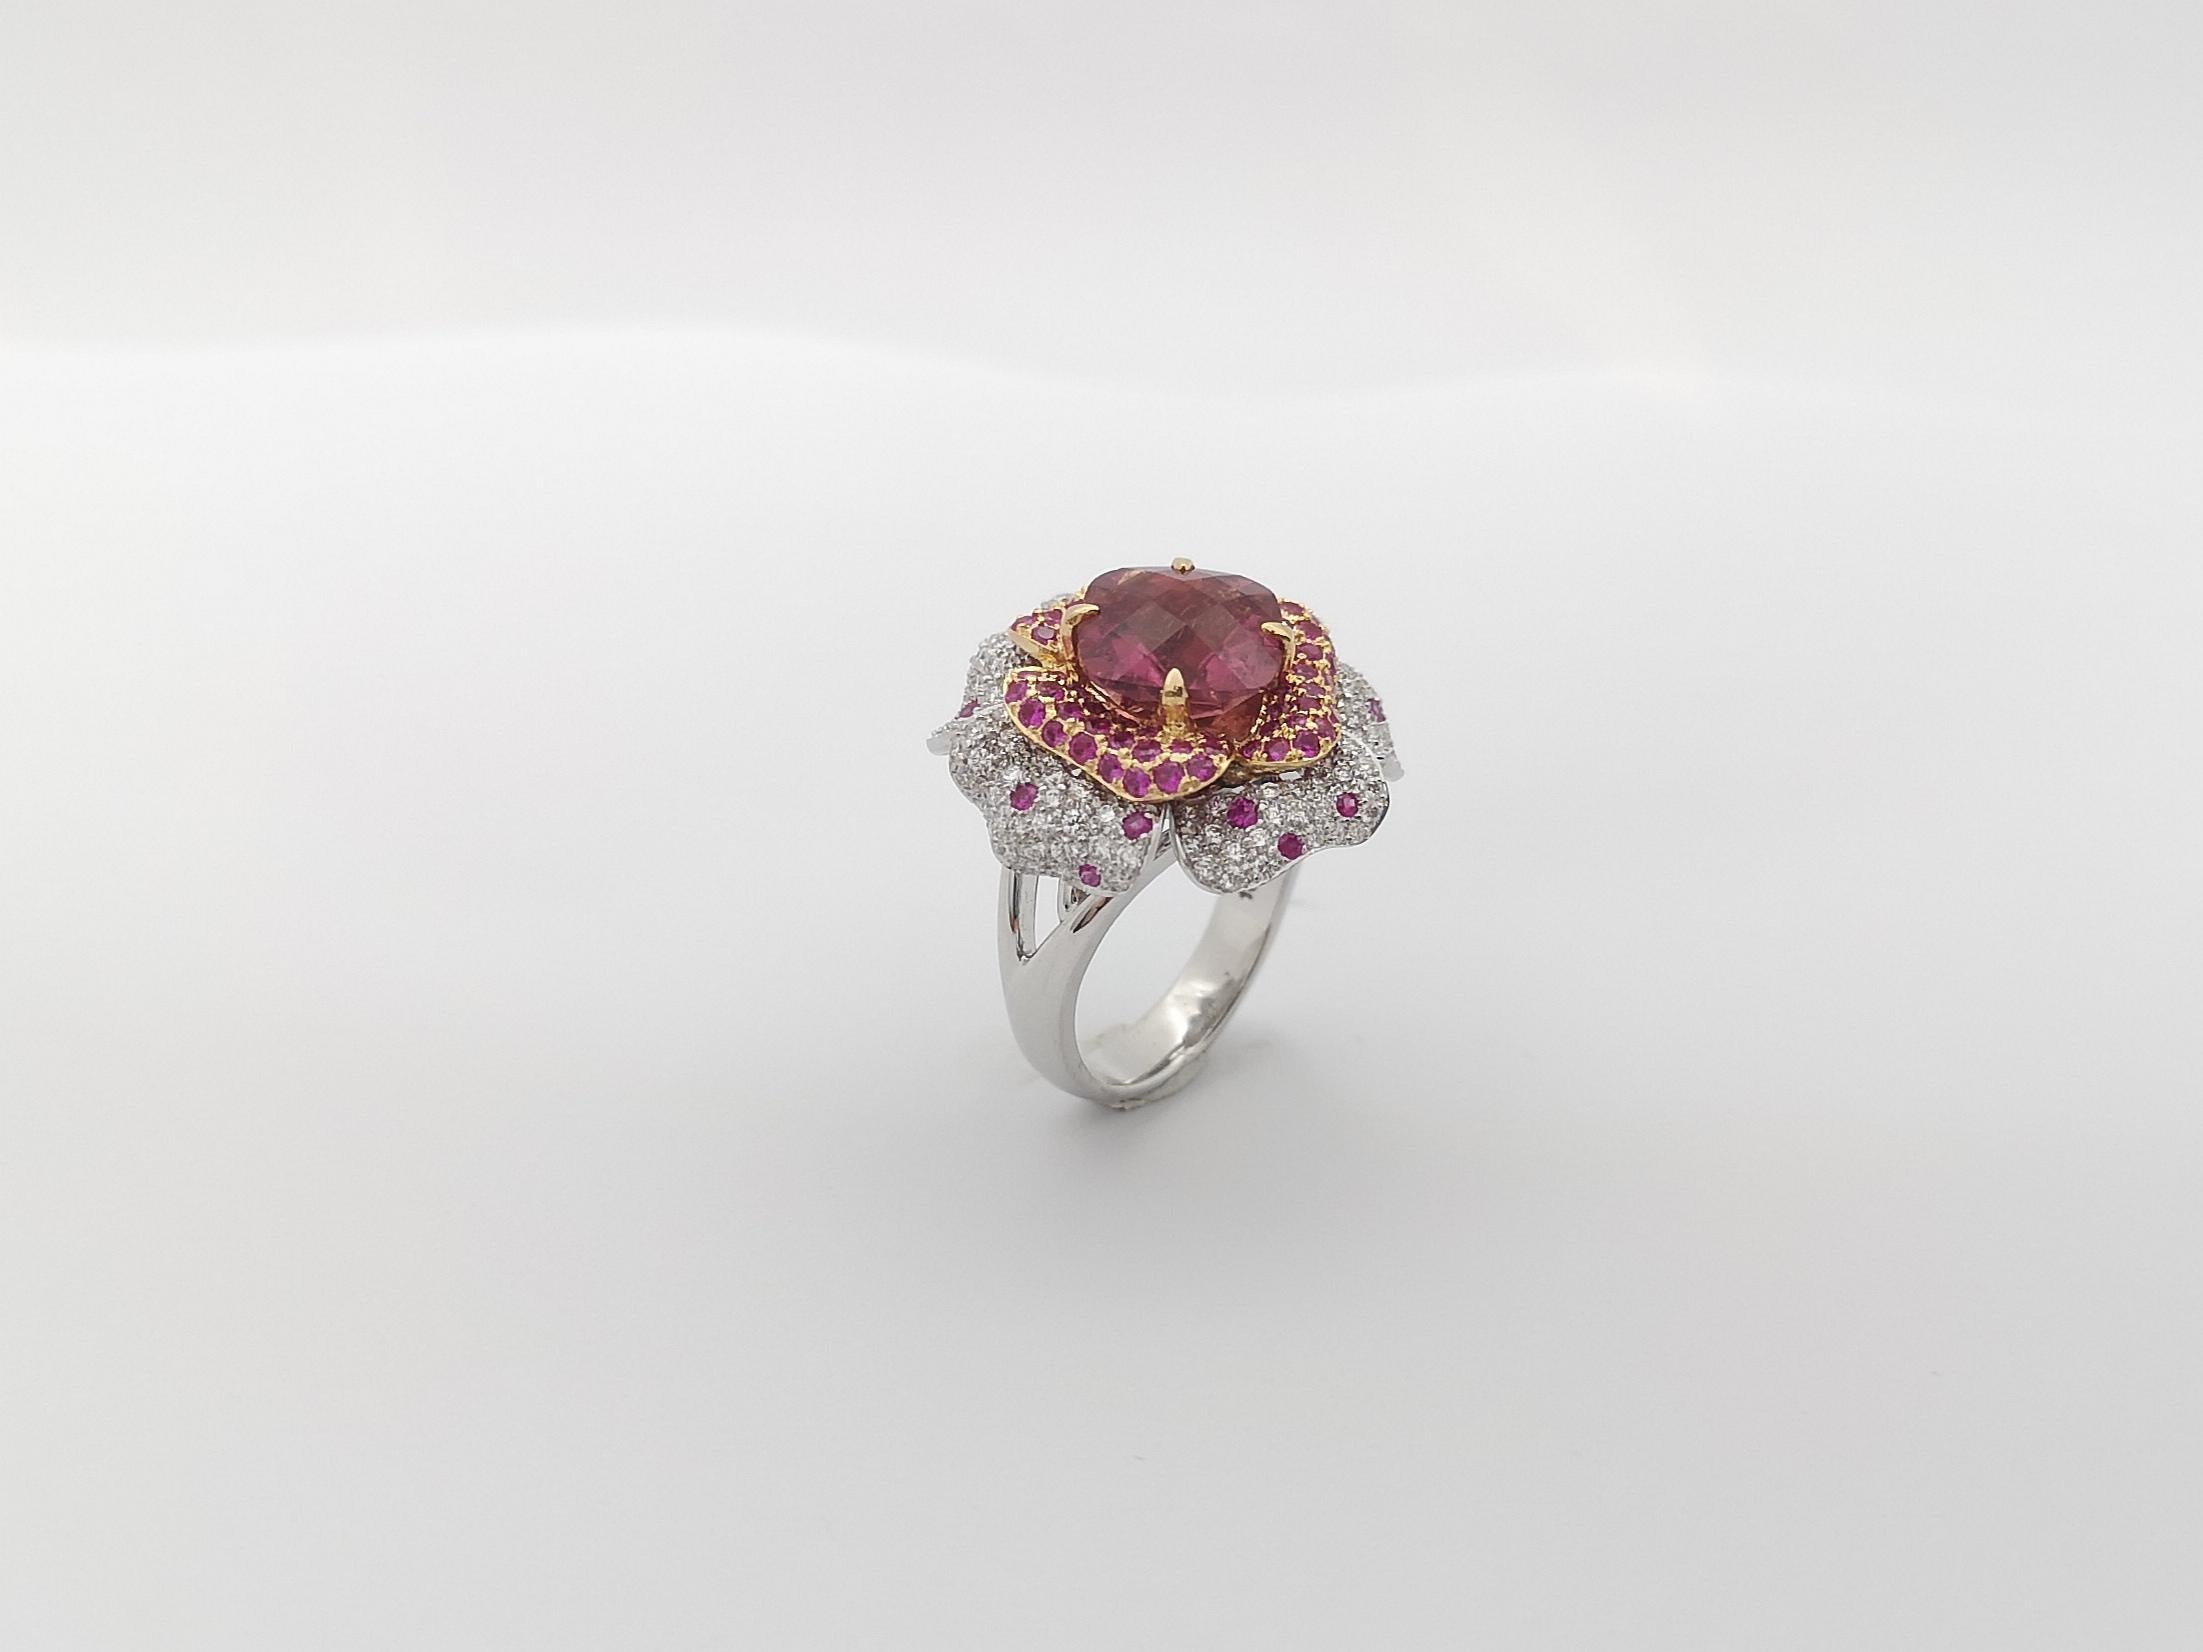 Pink Tourmaline, Pink Sapphire and Diamond Flower Ring set in 18K White Gold For Sale 5